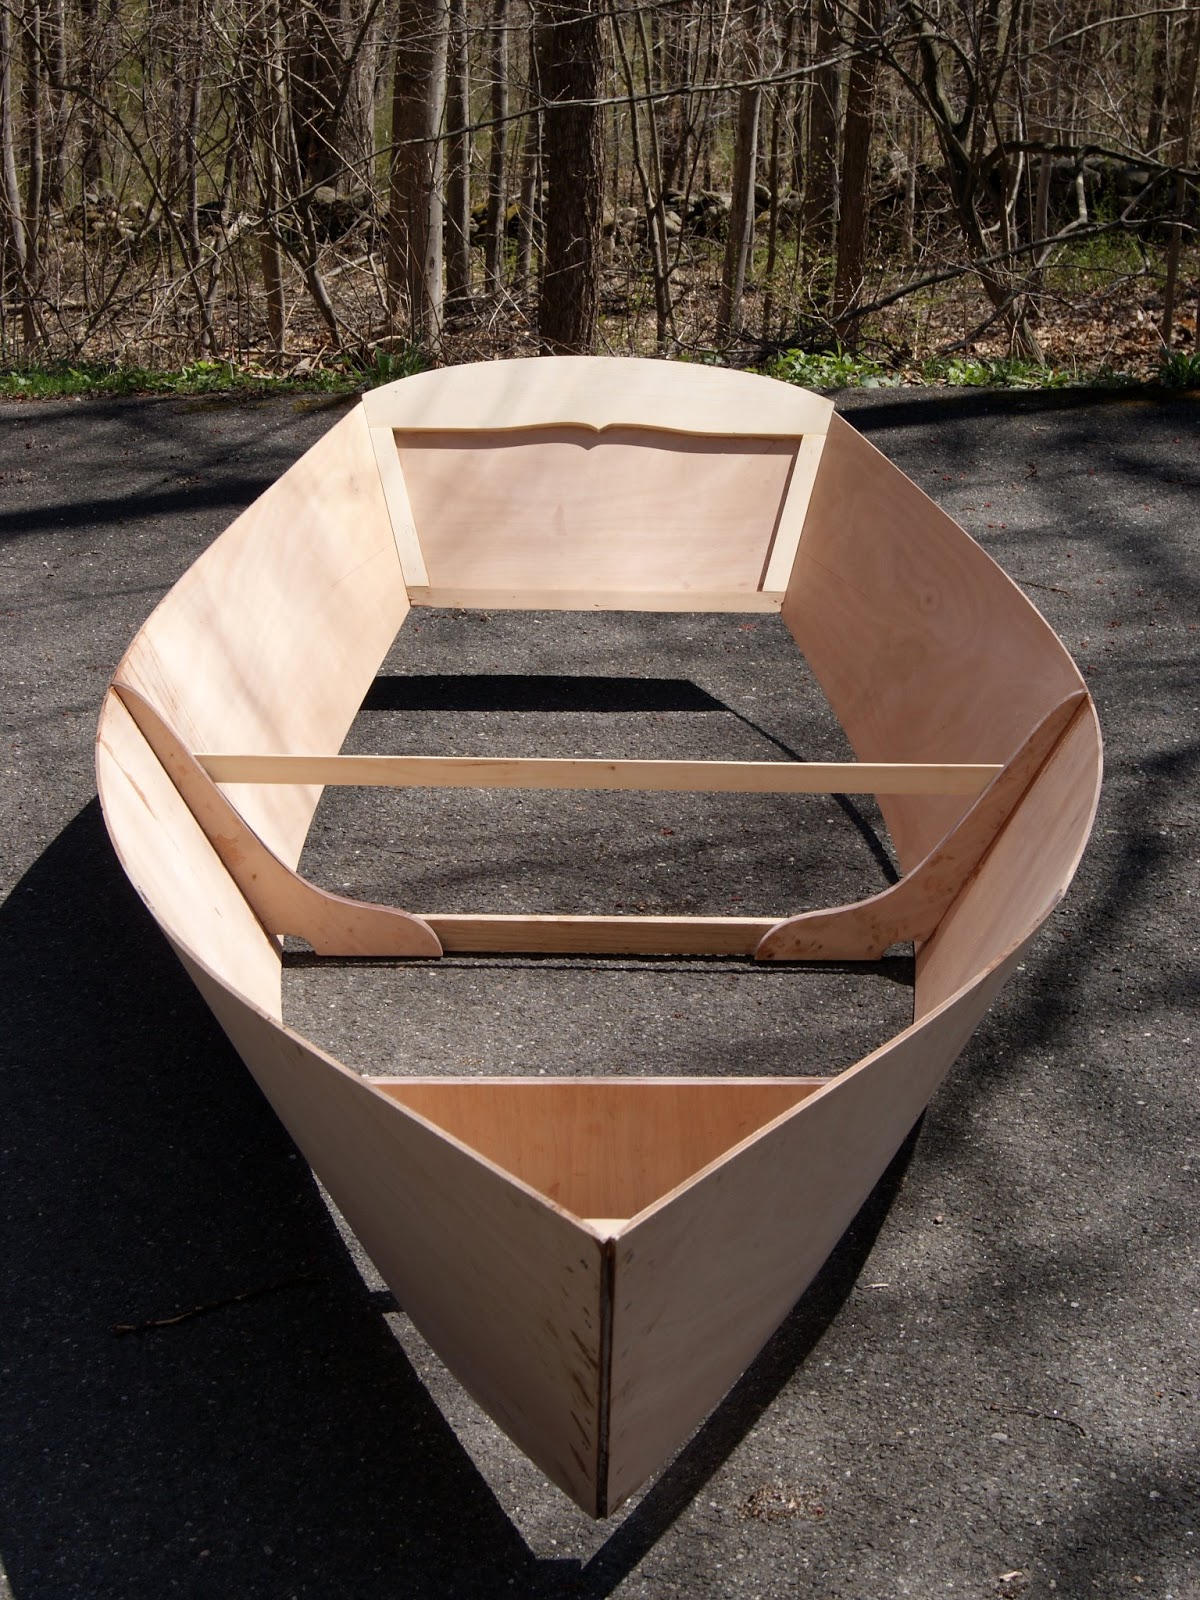 builder in CT making progress on his boat. Build your own!